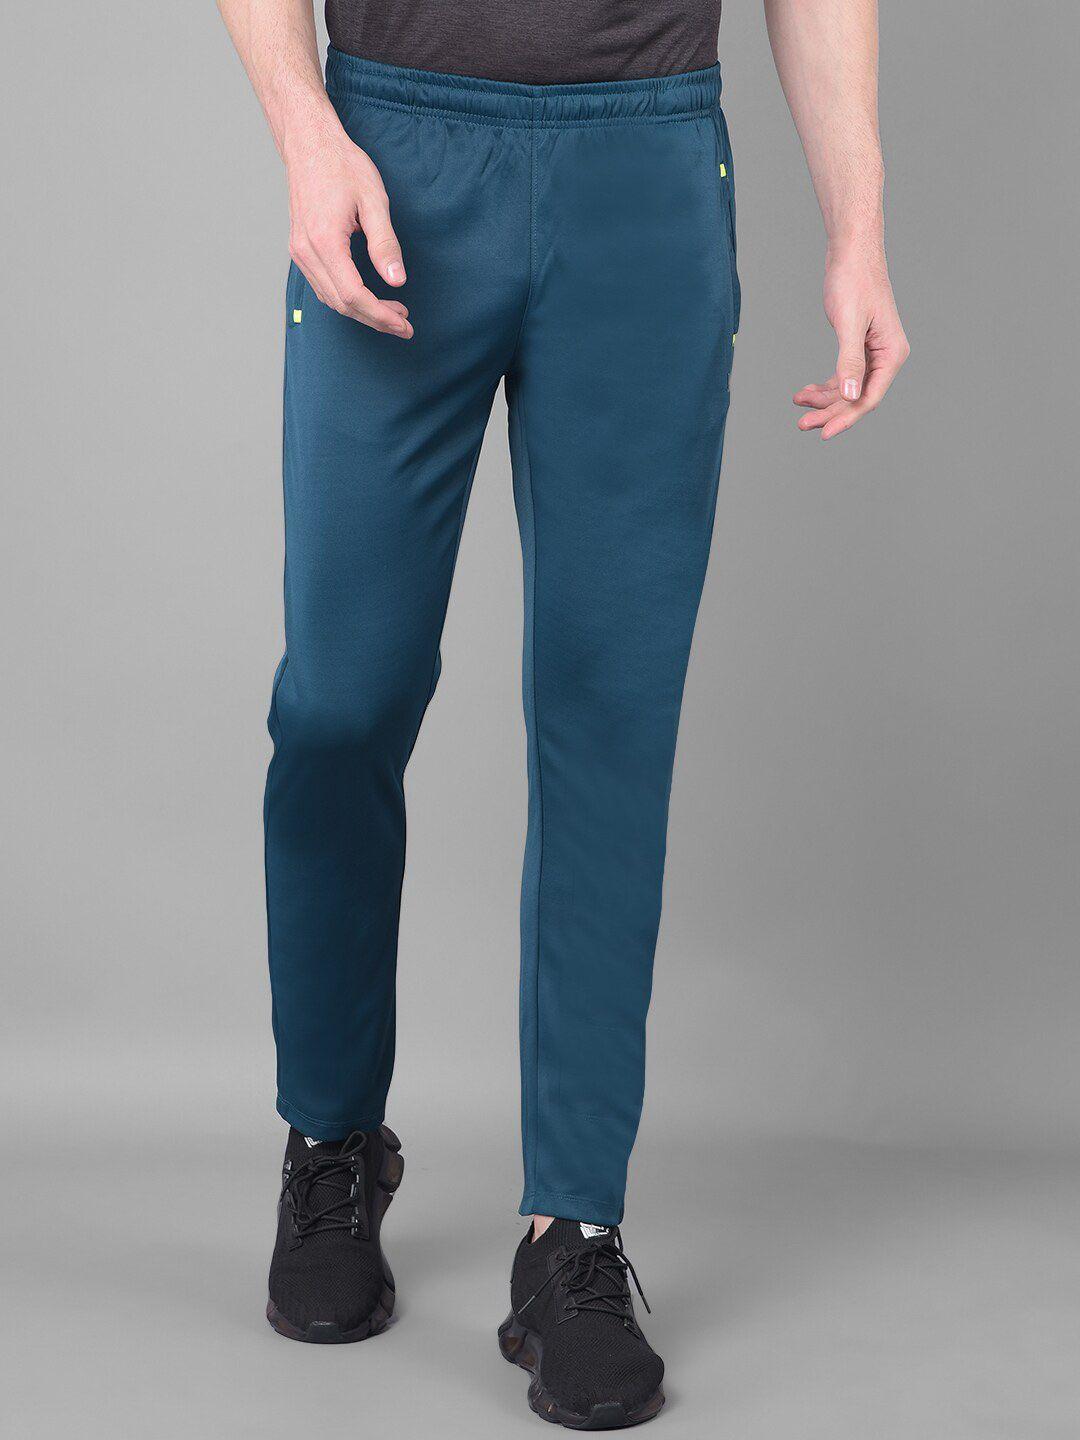 force-nxt-men-mid-rise-anti-odour-track-pant